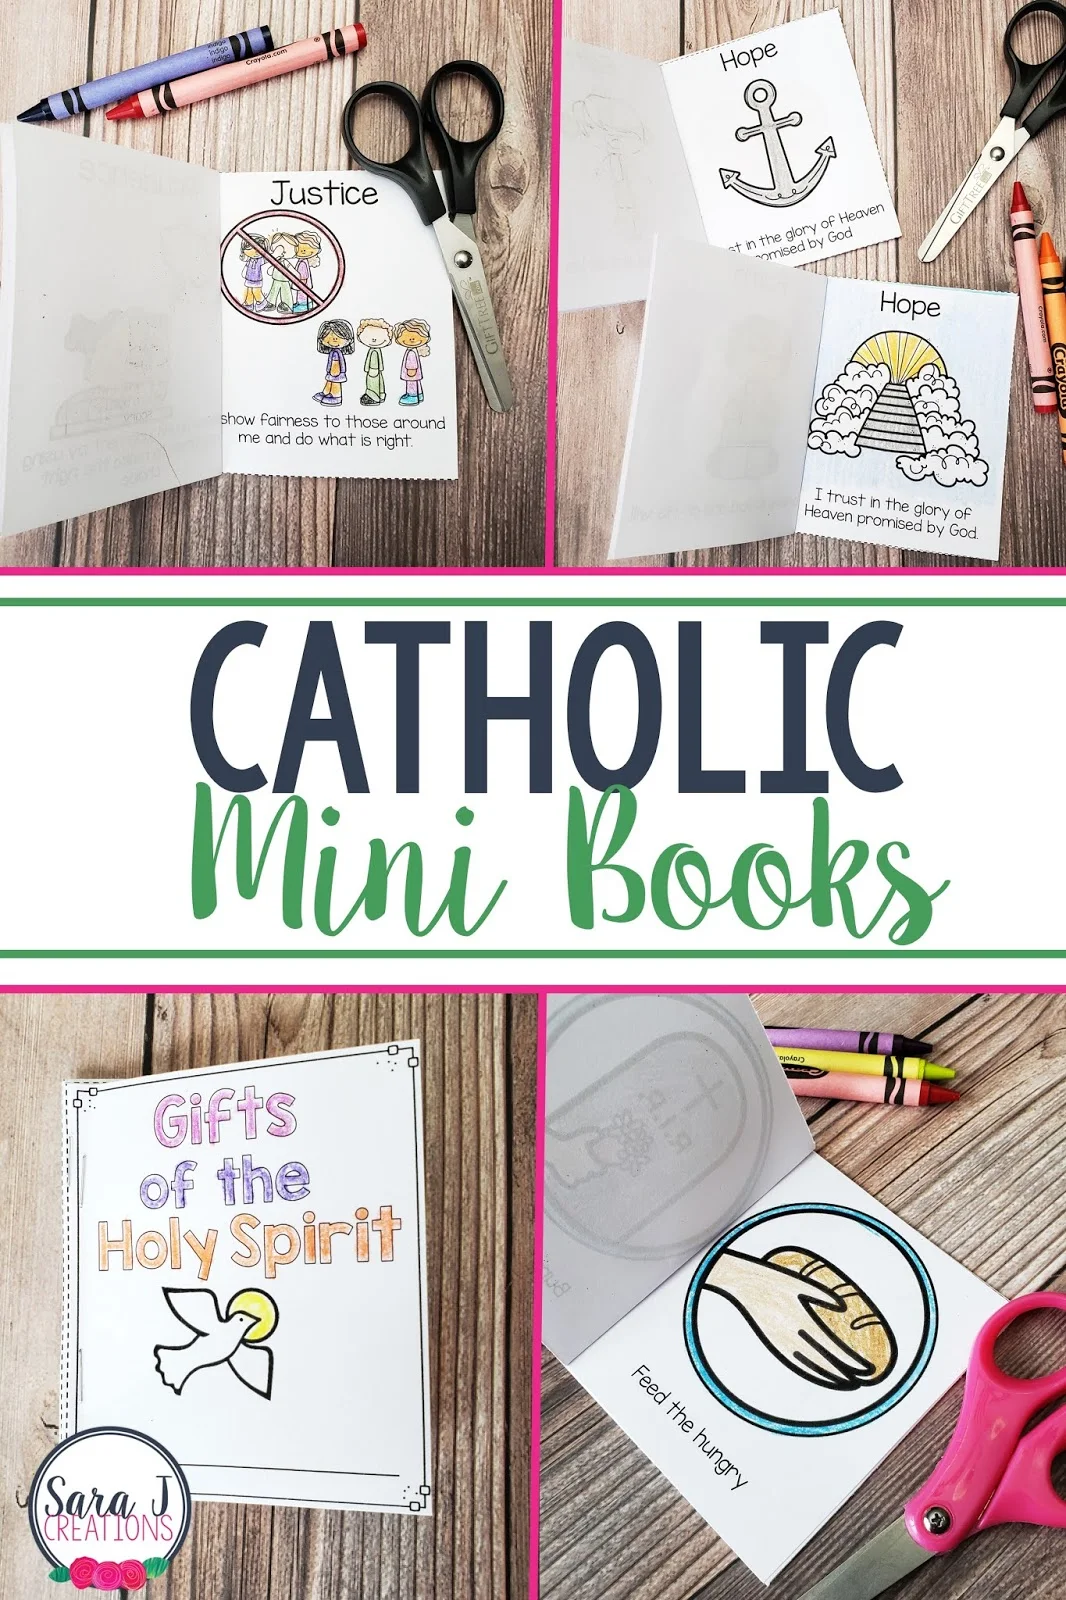 Catholic mini book bundle is the perfect printable activity for kids to teach them about the Catholic faith, the Bible, Jesus and more!